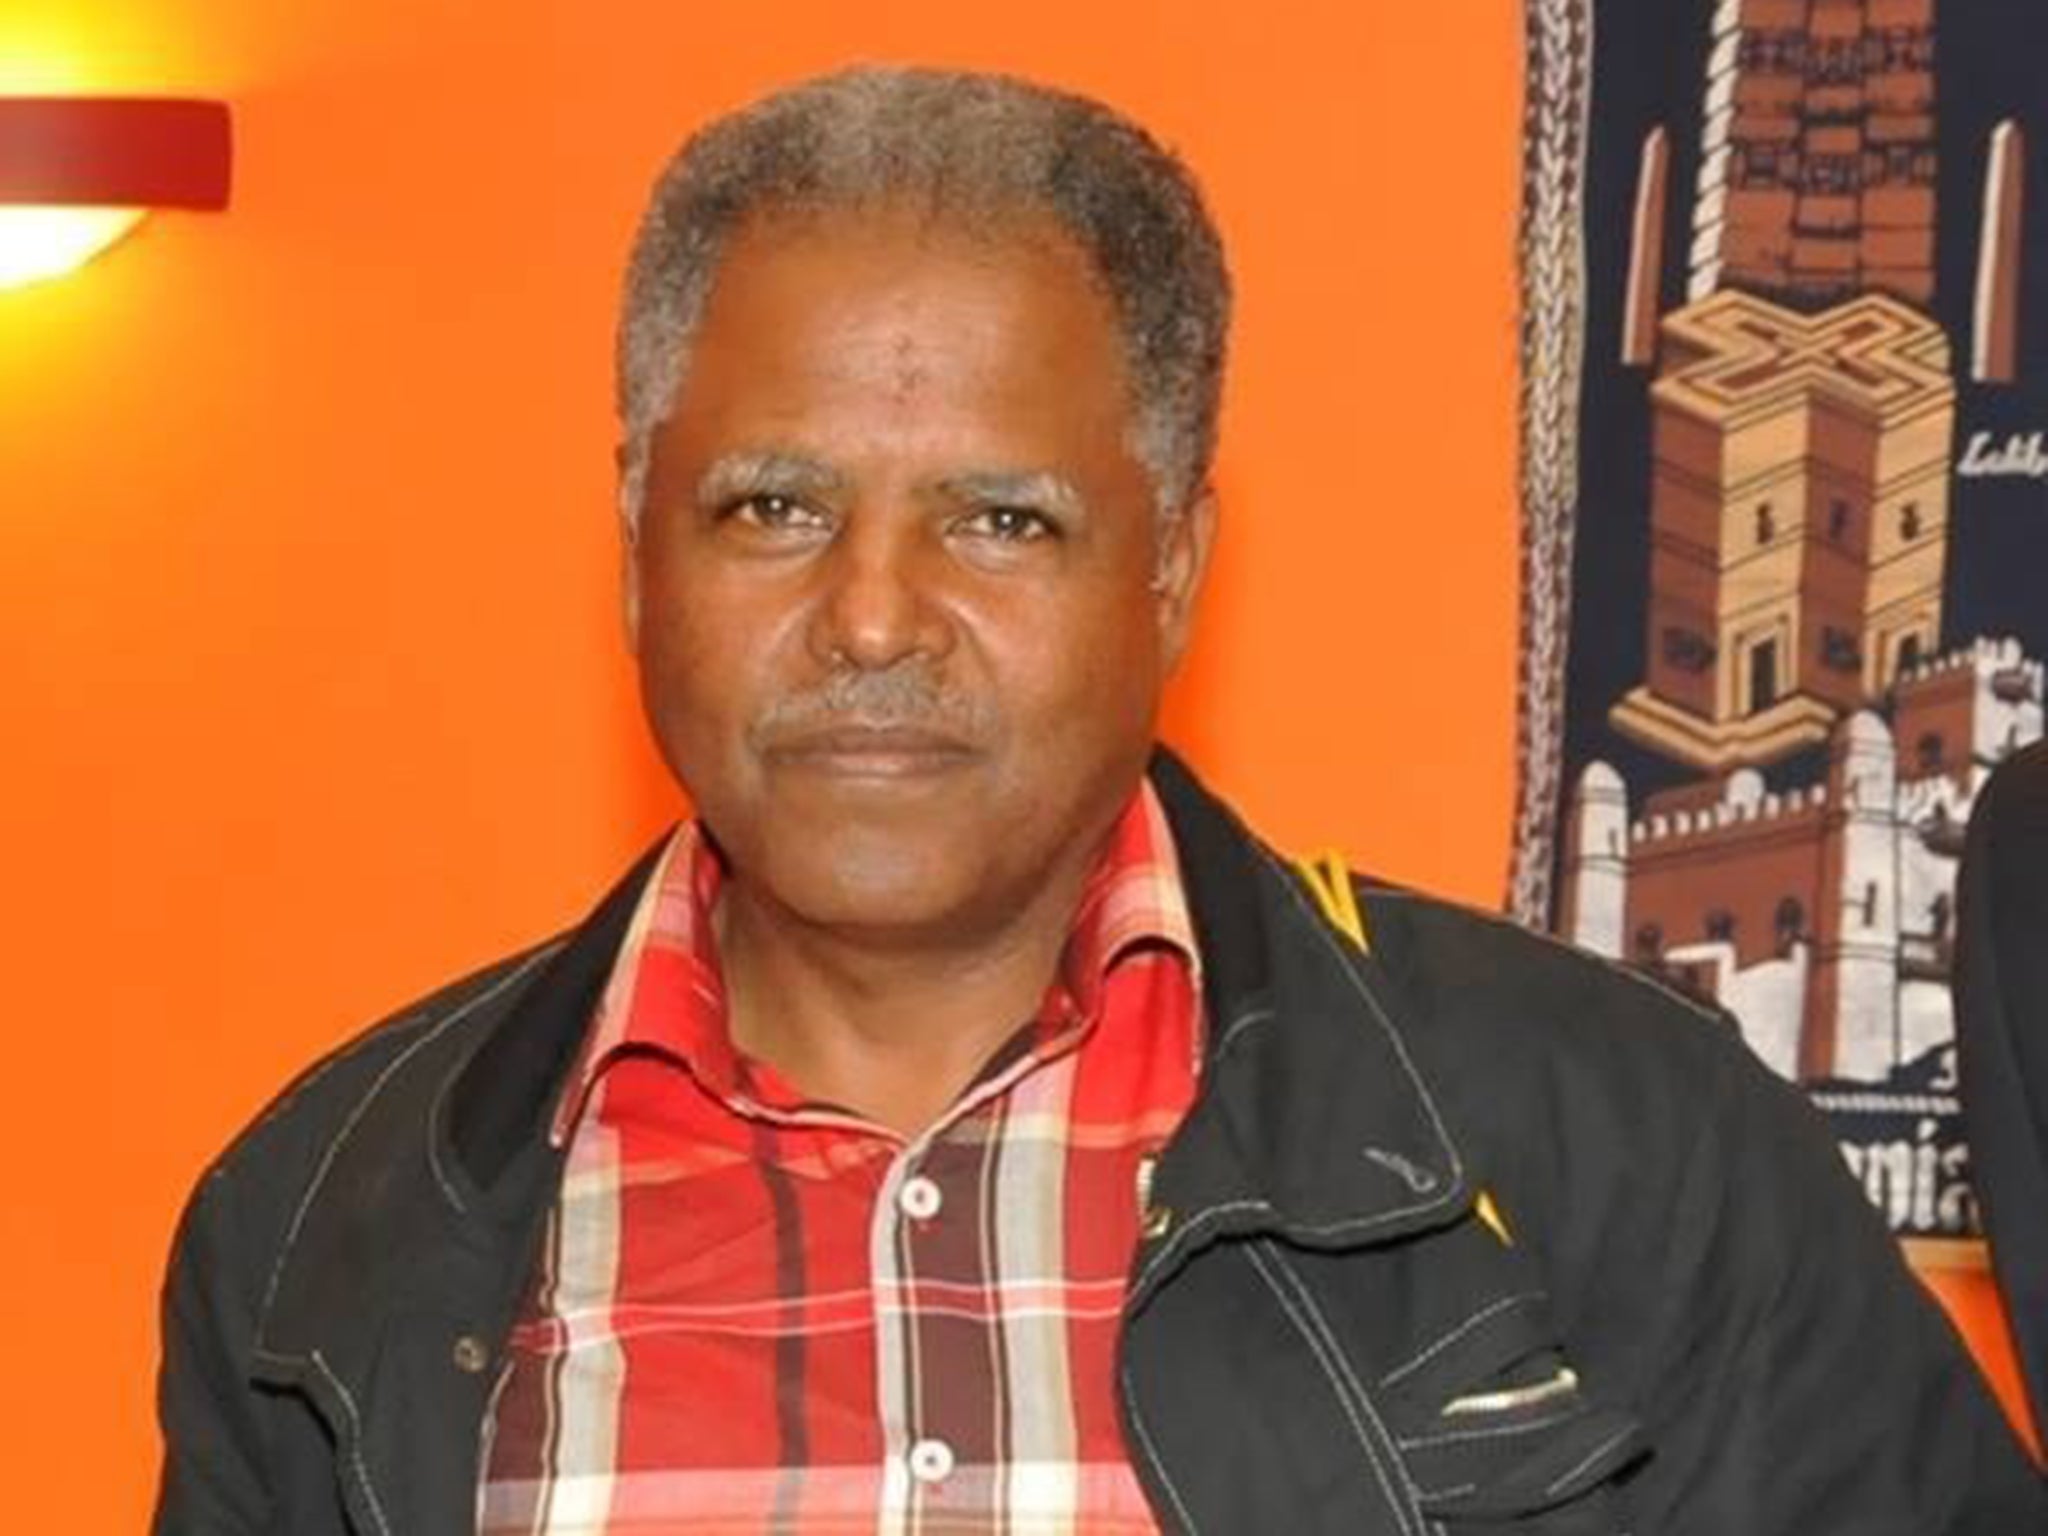 Andargachew “Andy” Tsege from London was seized at an airport in Yemen